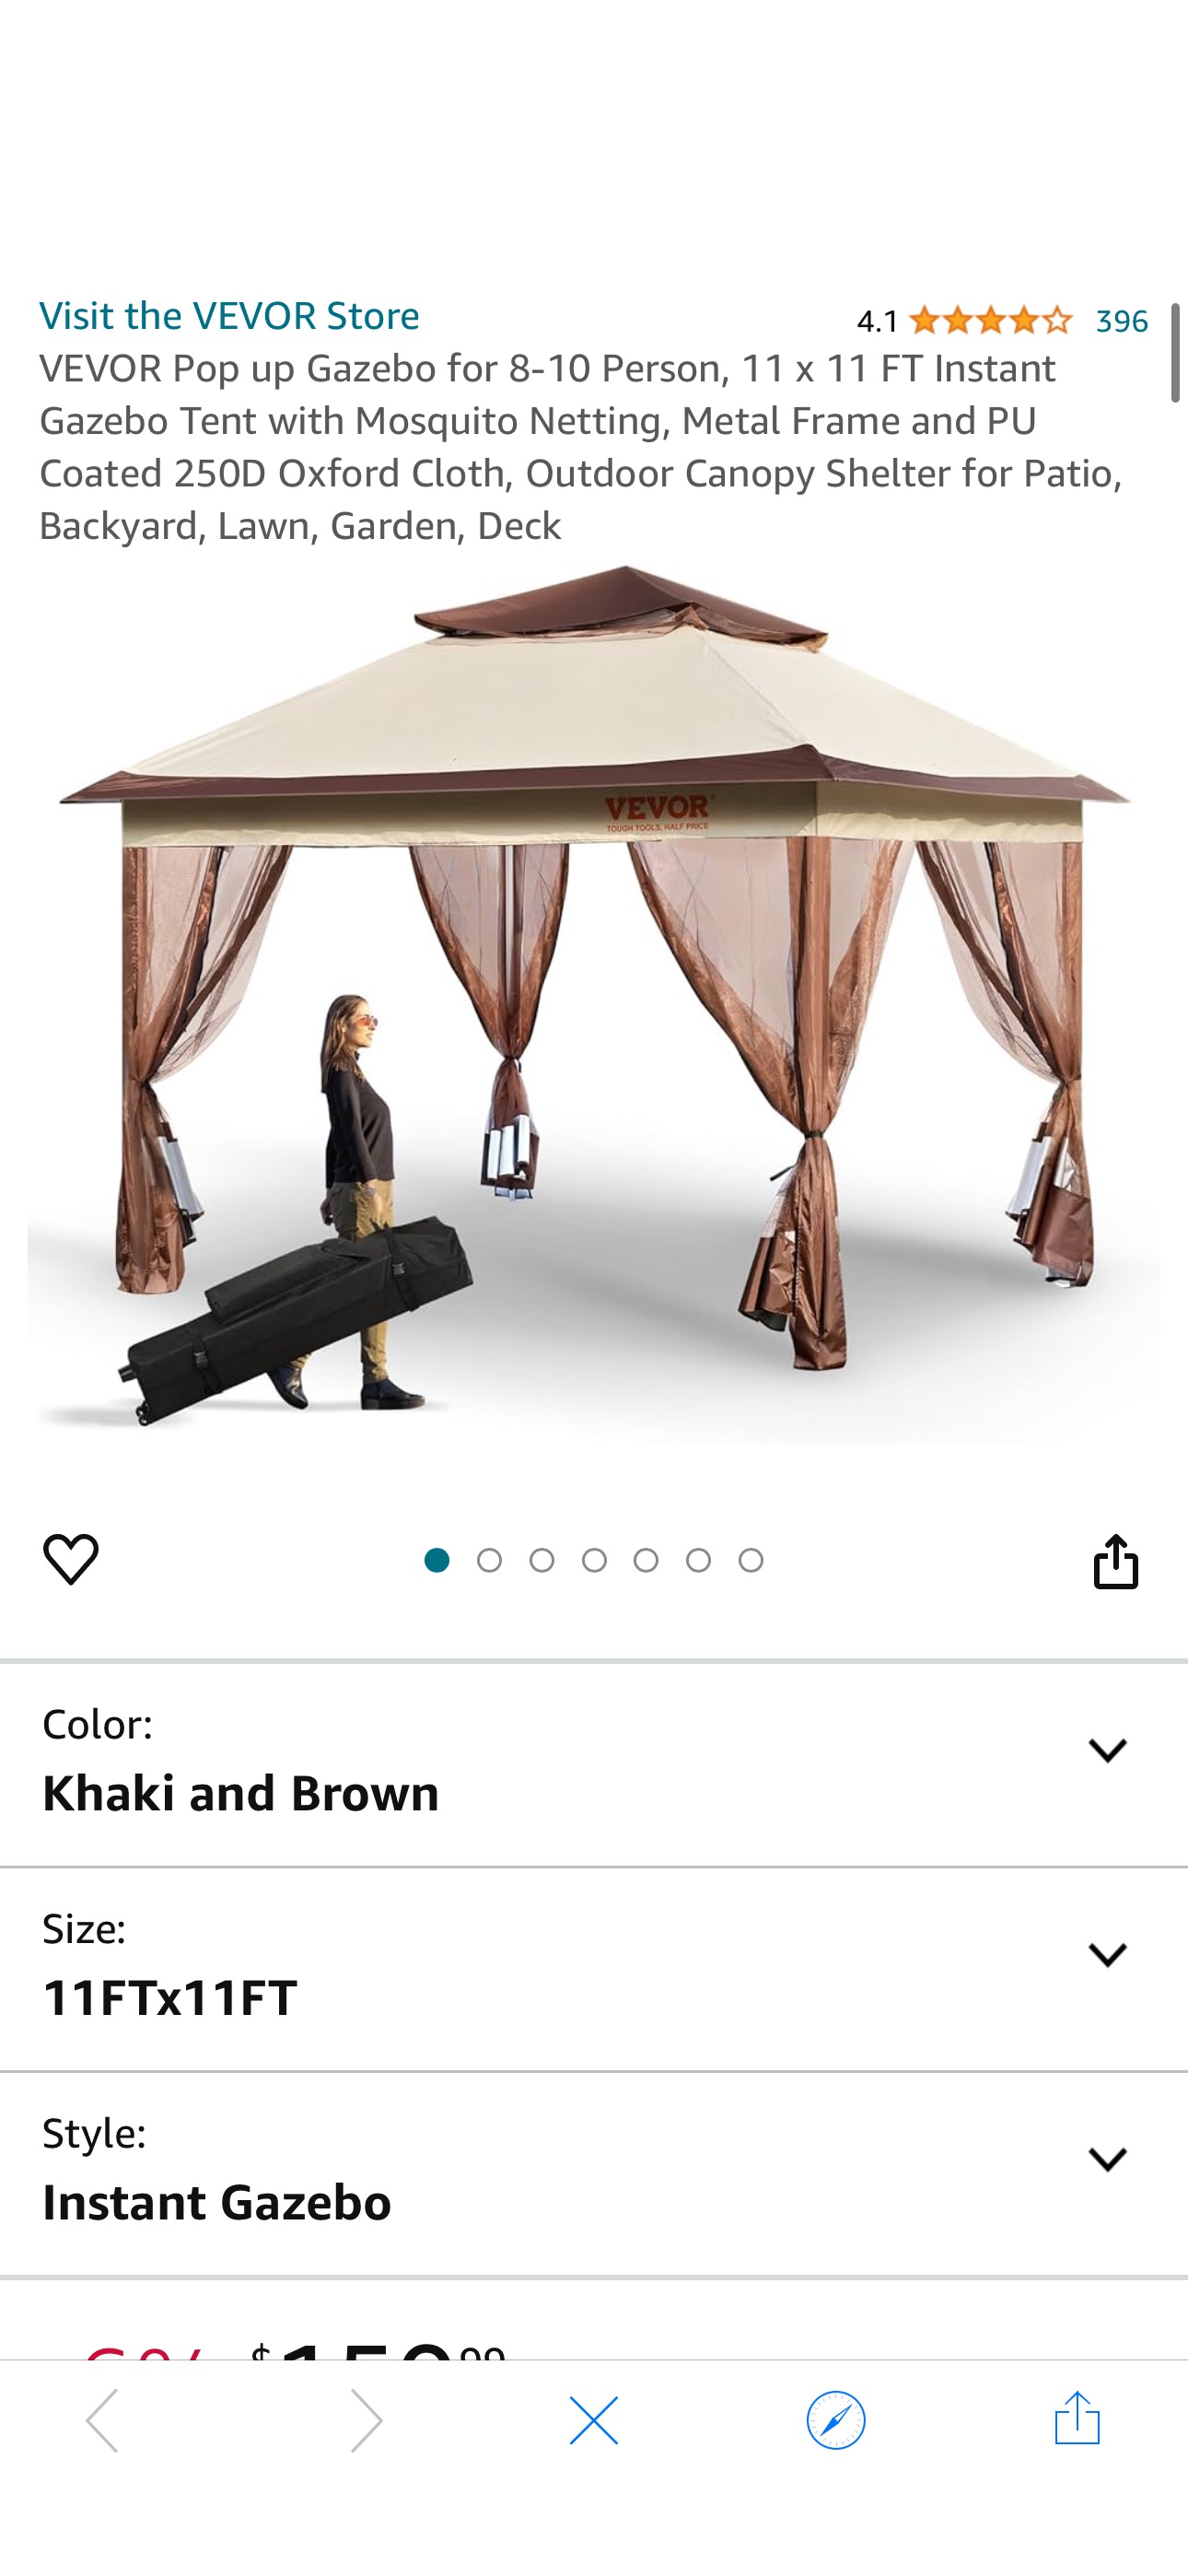 Amazon.com: VEVOR Pop up Gazebo for 8-10 Person, 11 x 11 FT Instant Gazebo Tent with Mosquito Netting 95.99 after code 40KMVHF9